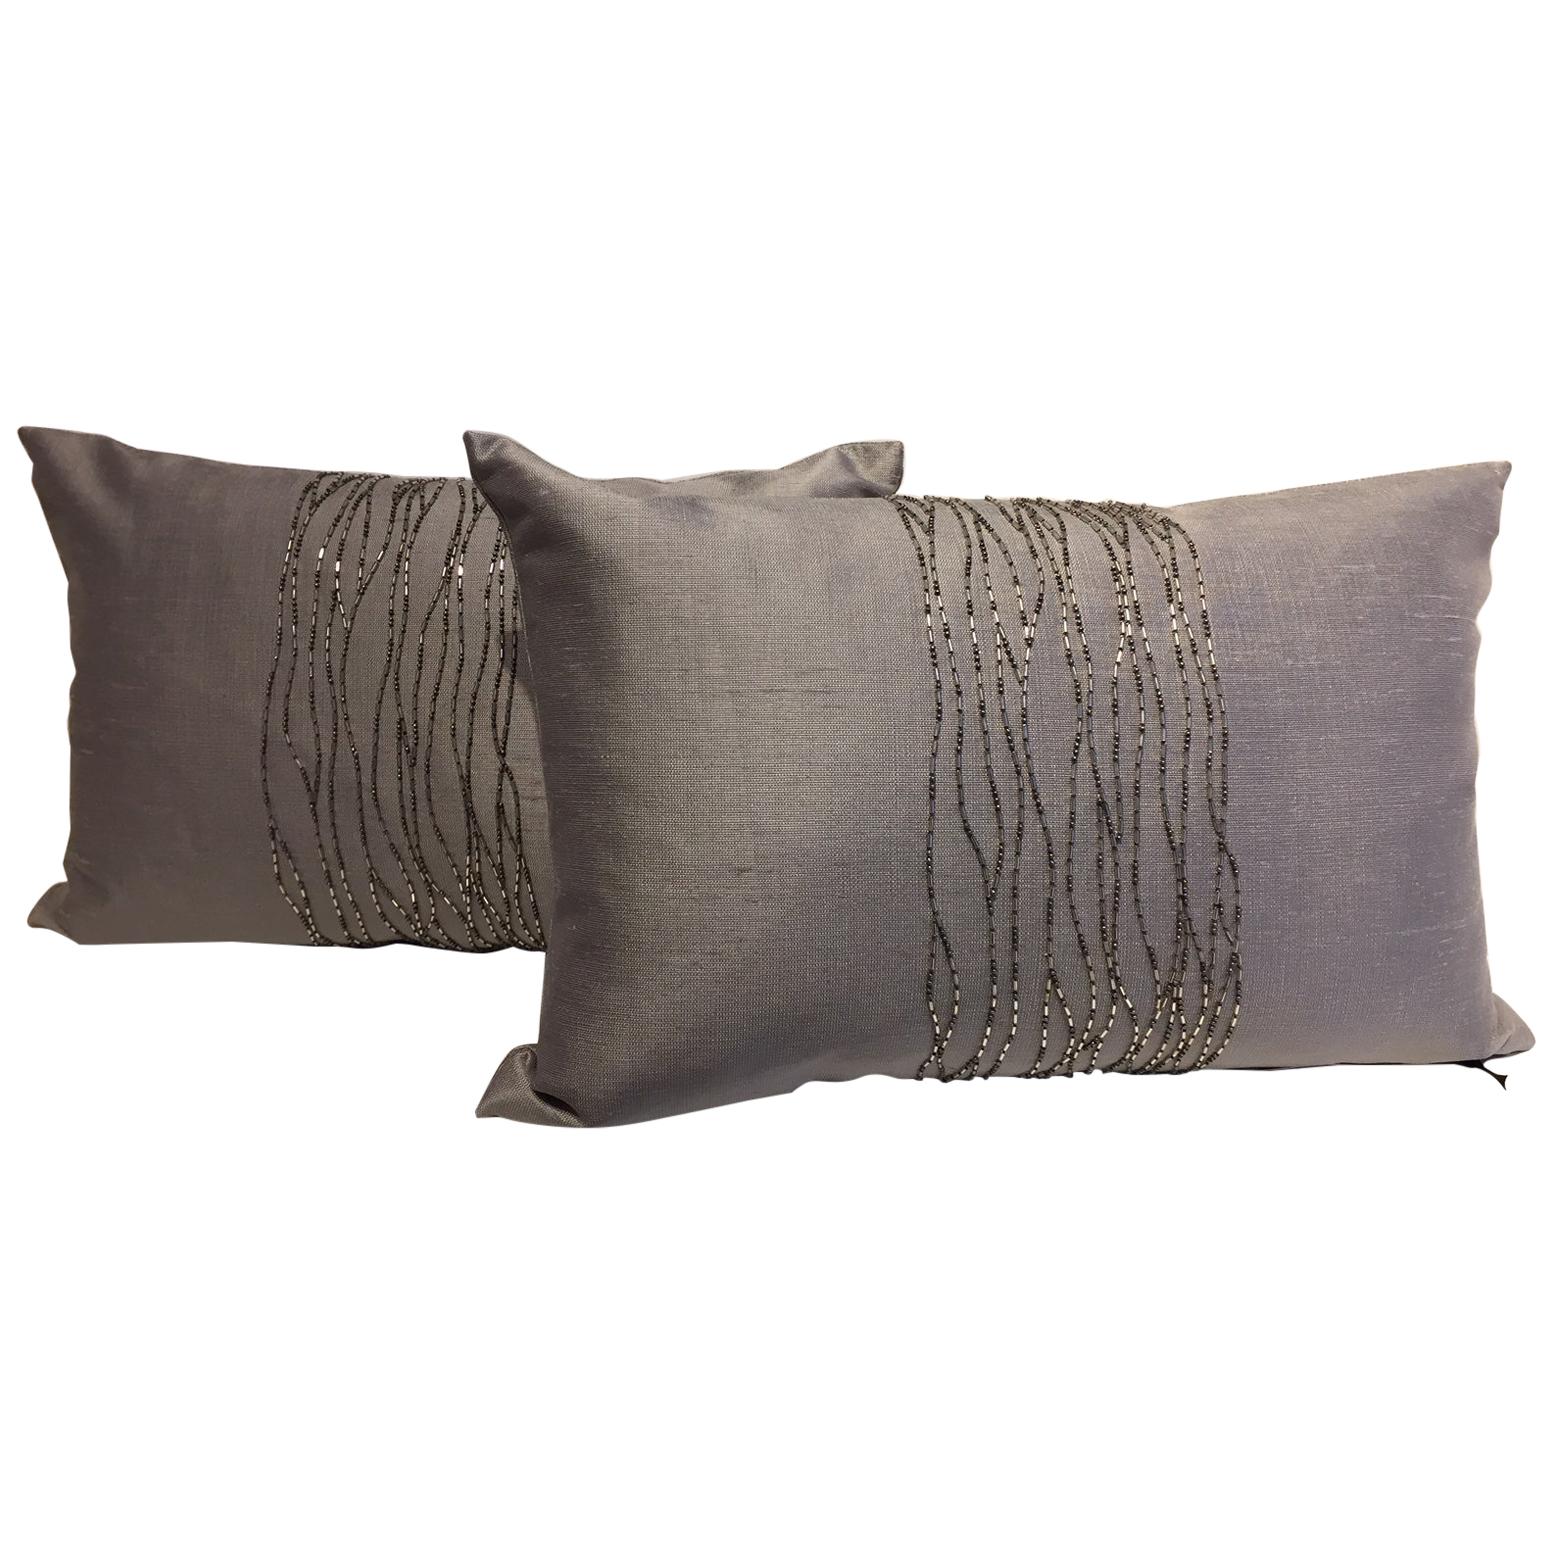 Contemporary Hand Embroidered Cushions with Silver Beading on Silver-Grey Silk